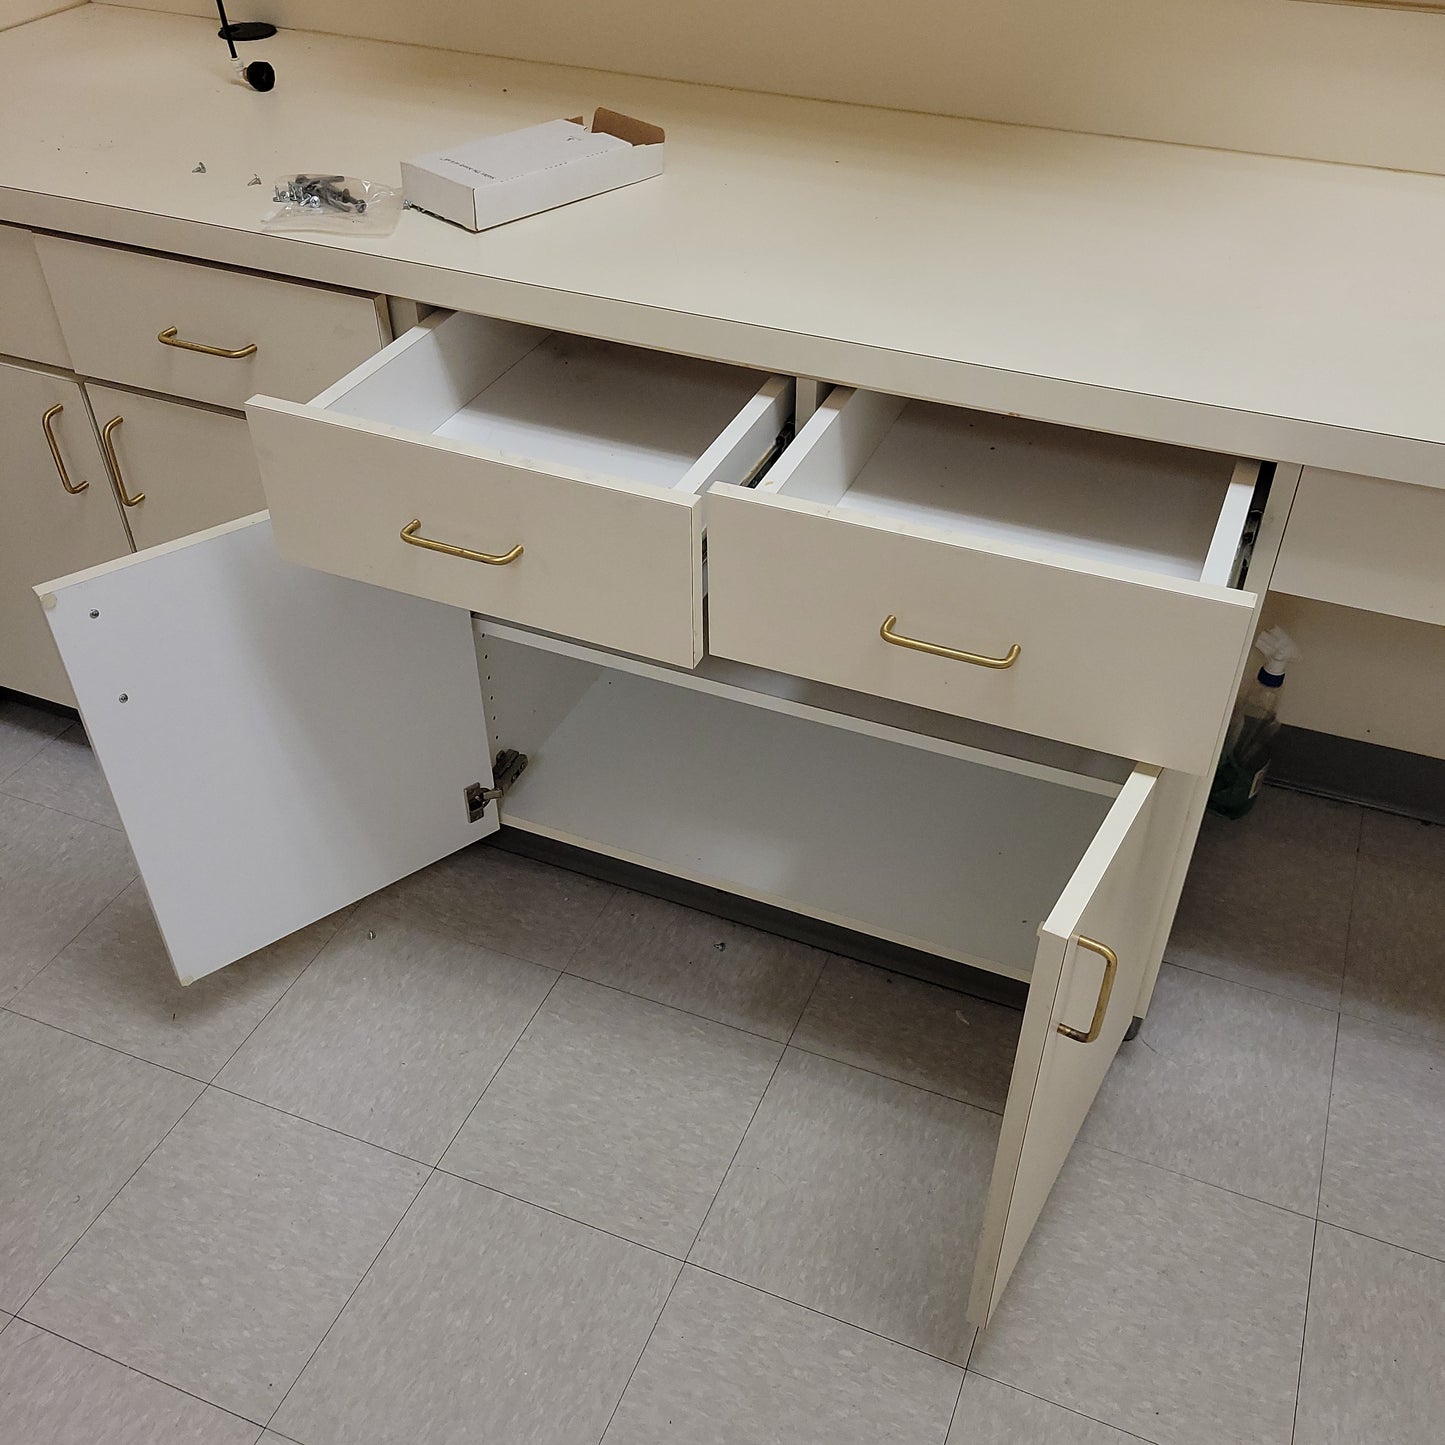 Storage cabinet countertop with sink